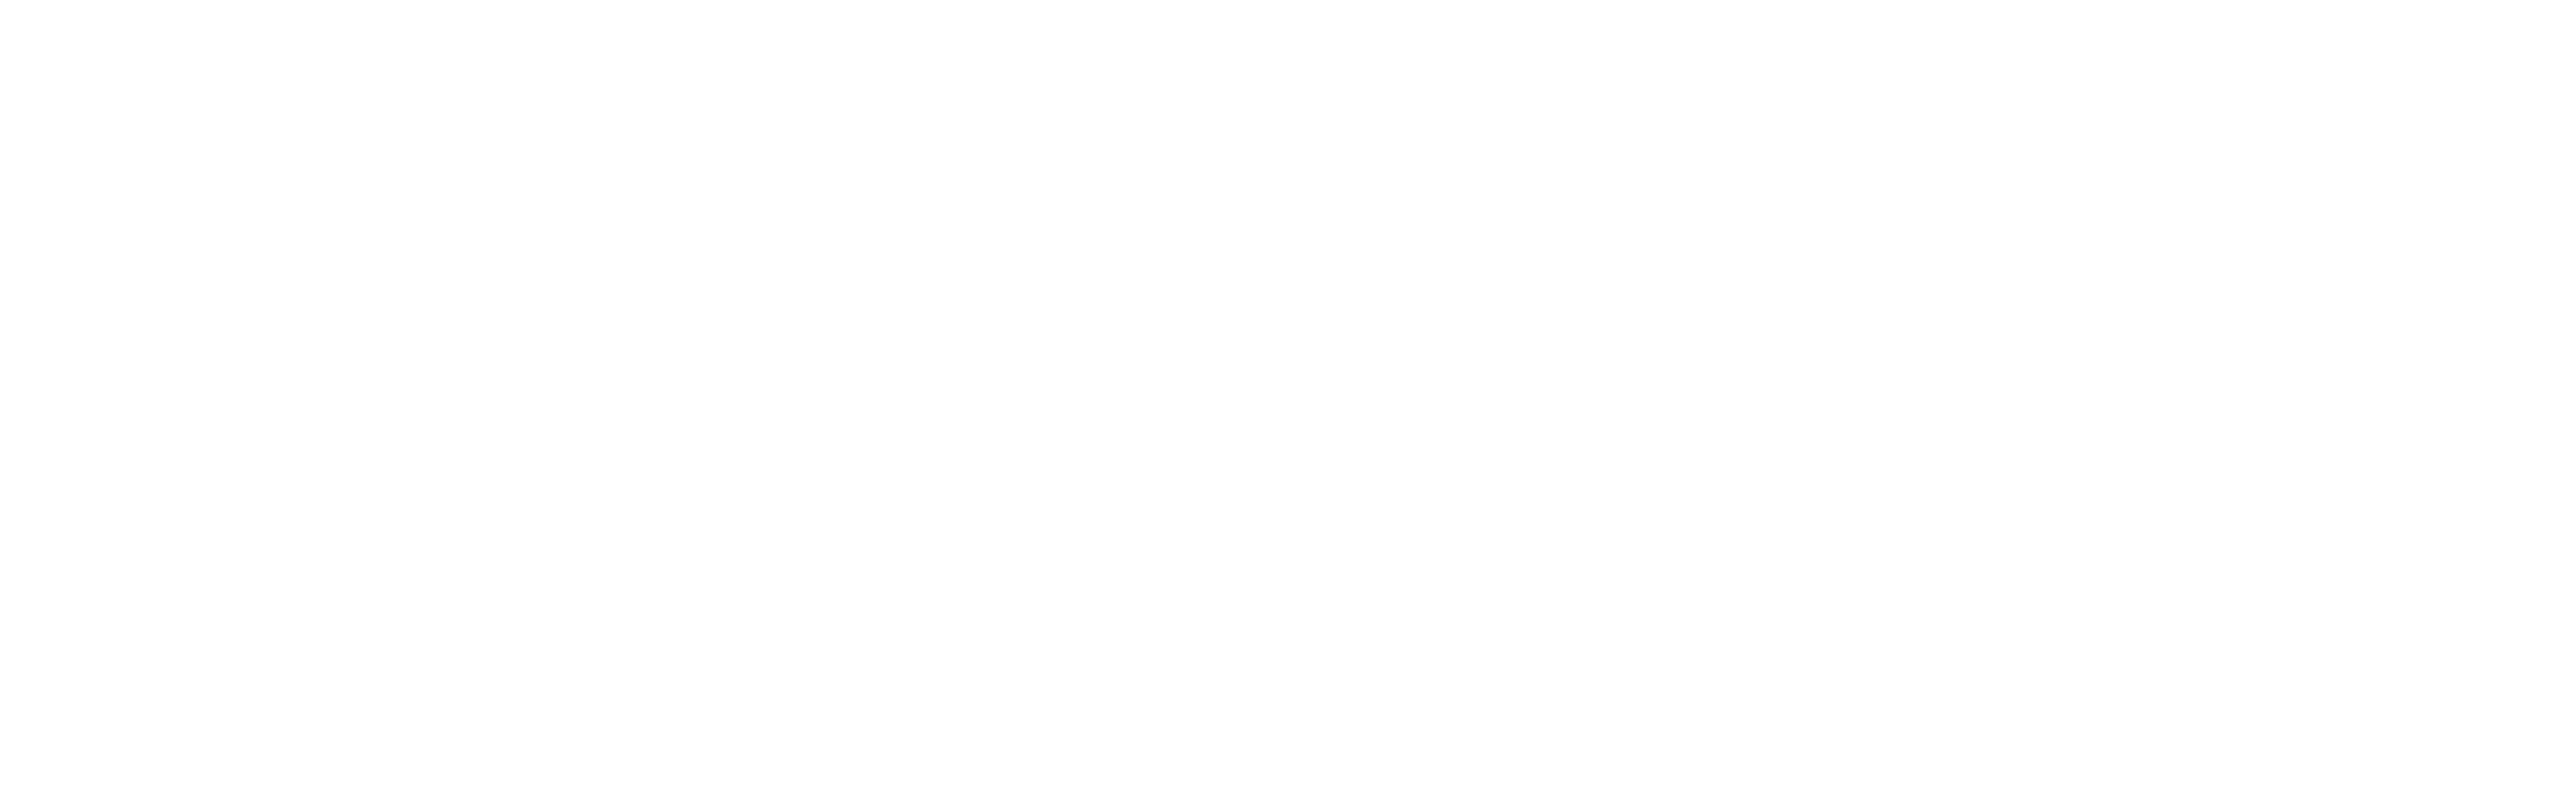 Ice Age: Dawn of the Dinosaurs logo